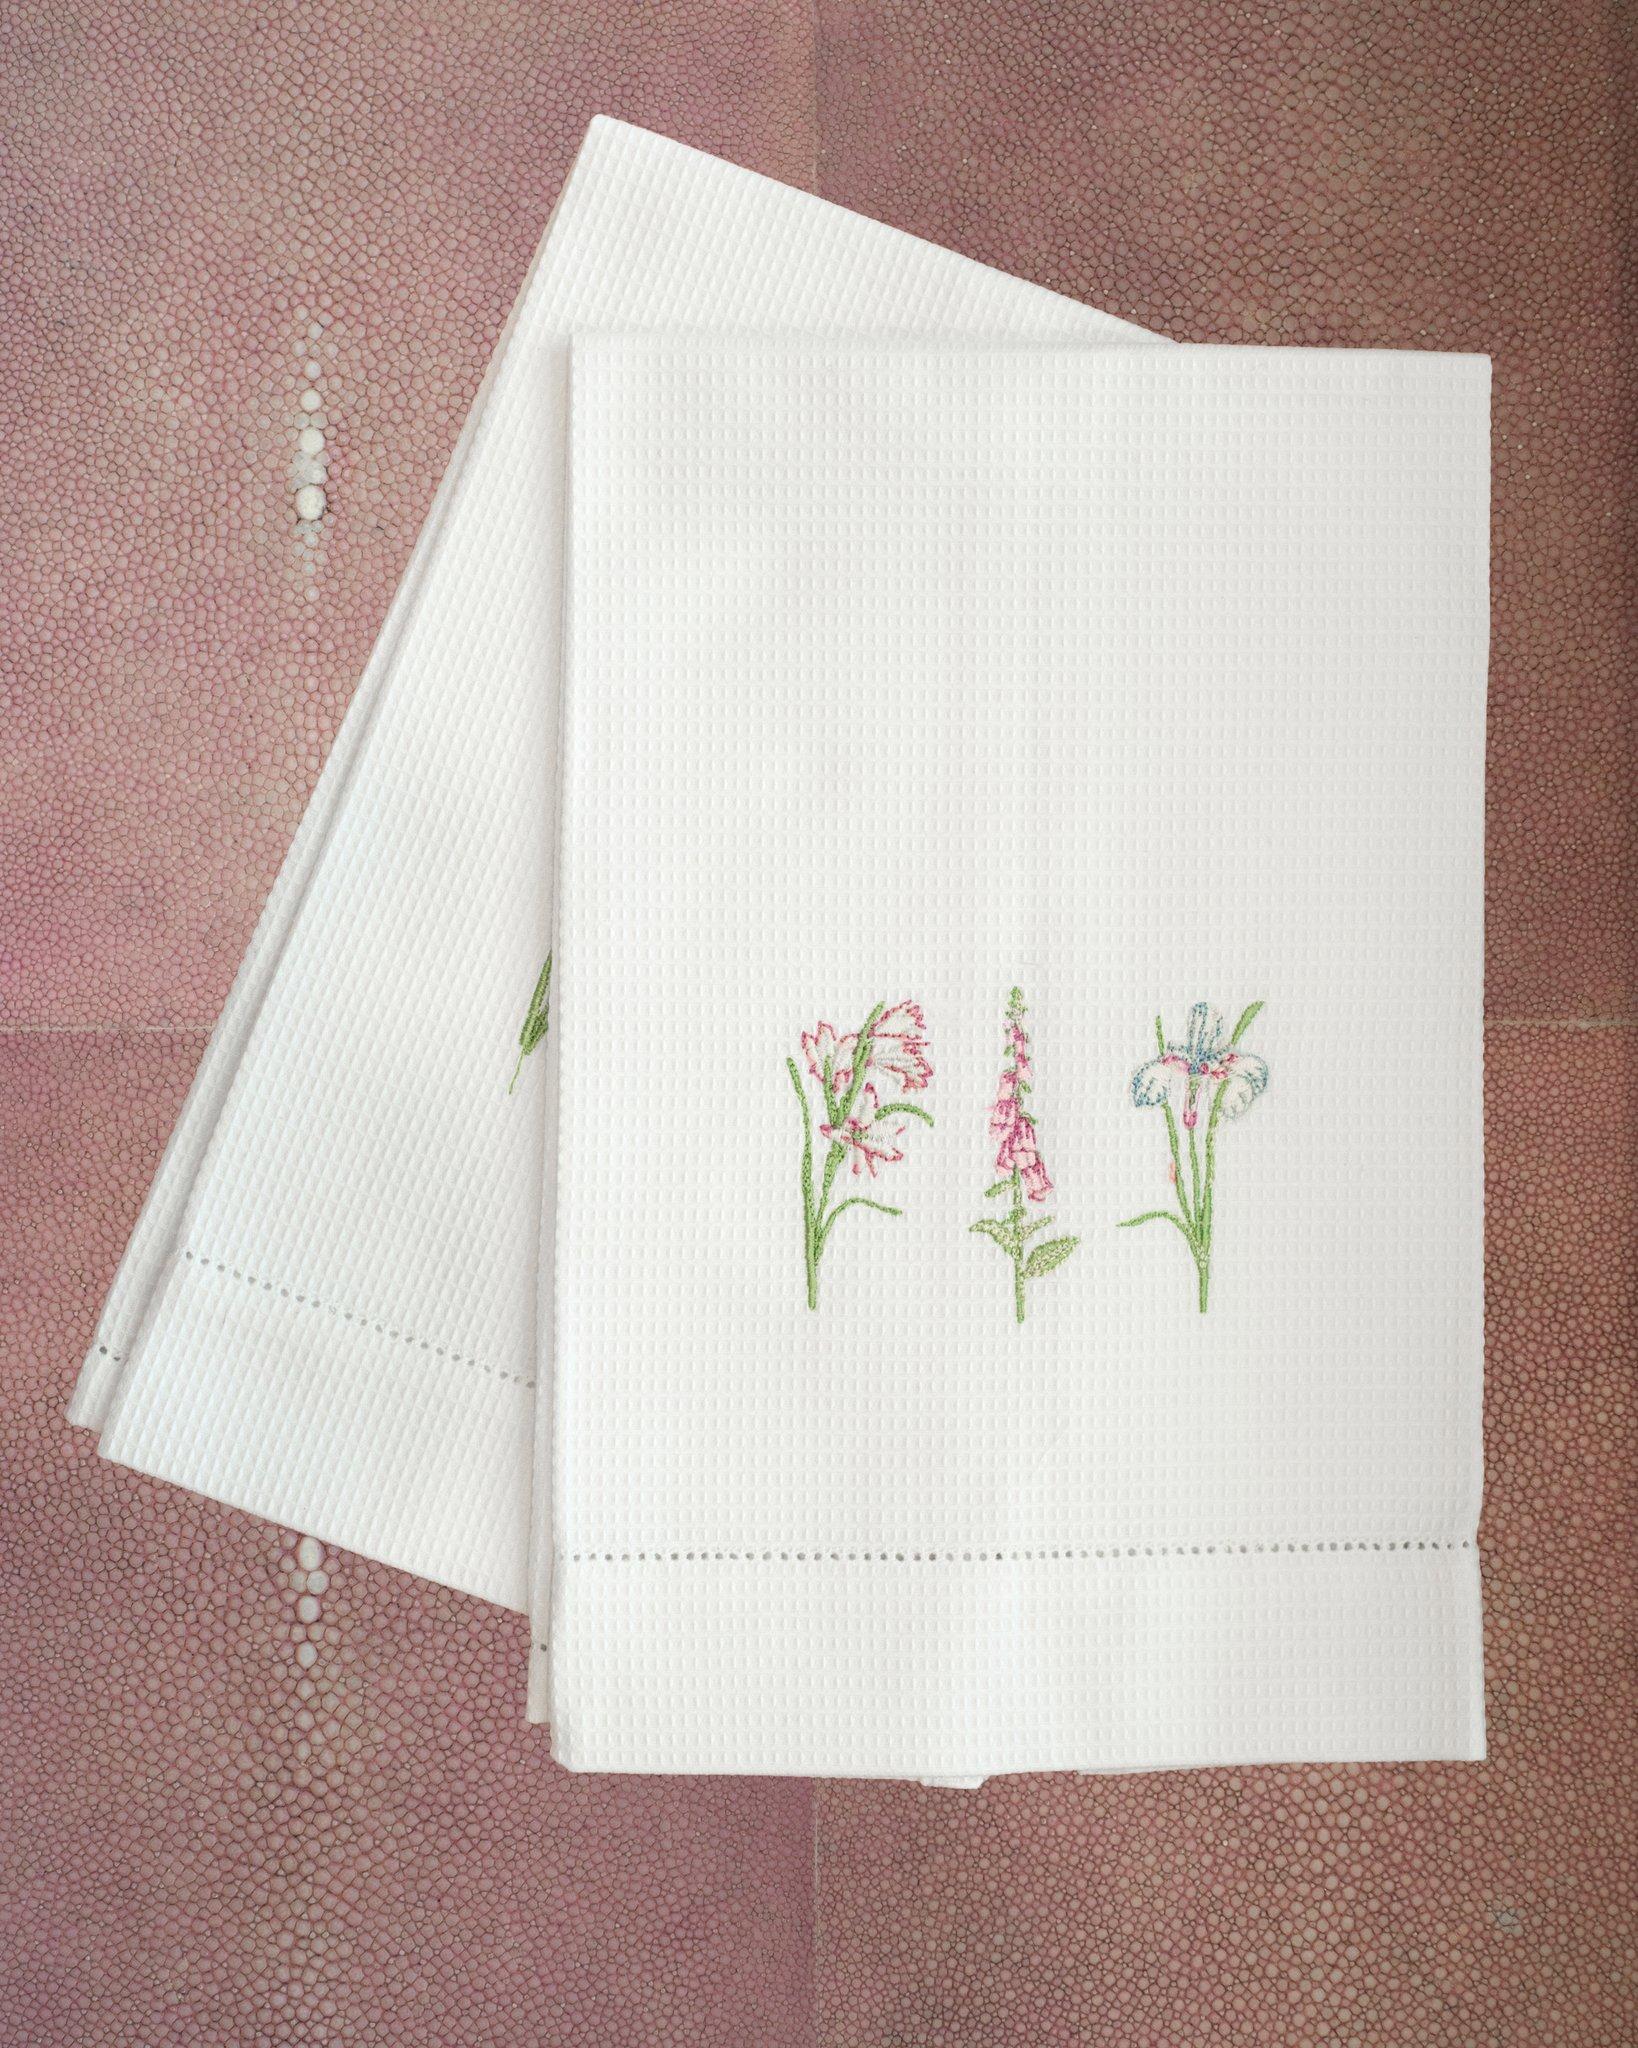 A stunning hand embroidered linen guest towel in cotton, made by hand in Portugal and embroidered with flowers. A unique blend of timeless European inspiration and Classic design expressed in the finest materials and finishes. Operating since 1938,